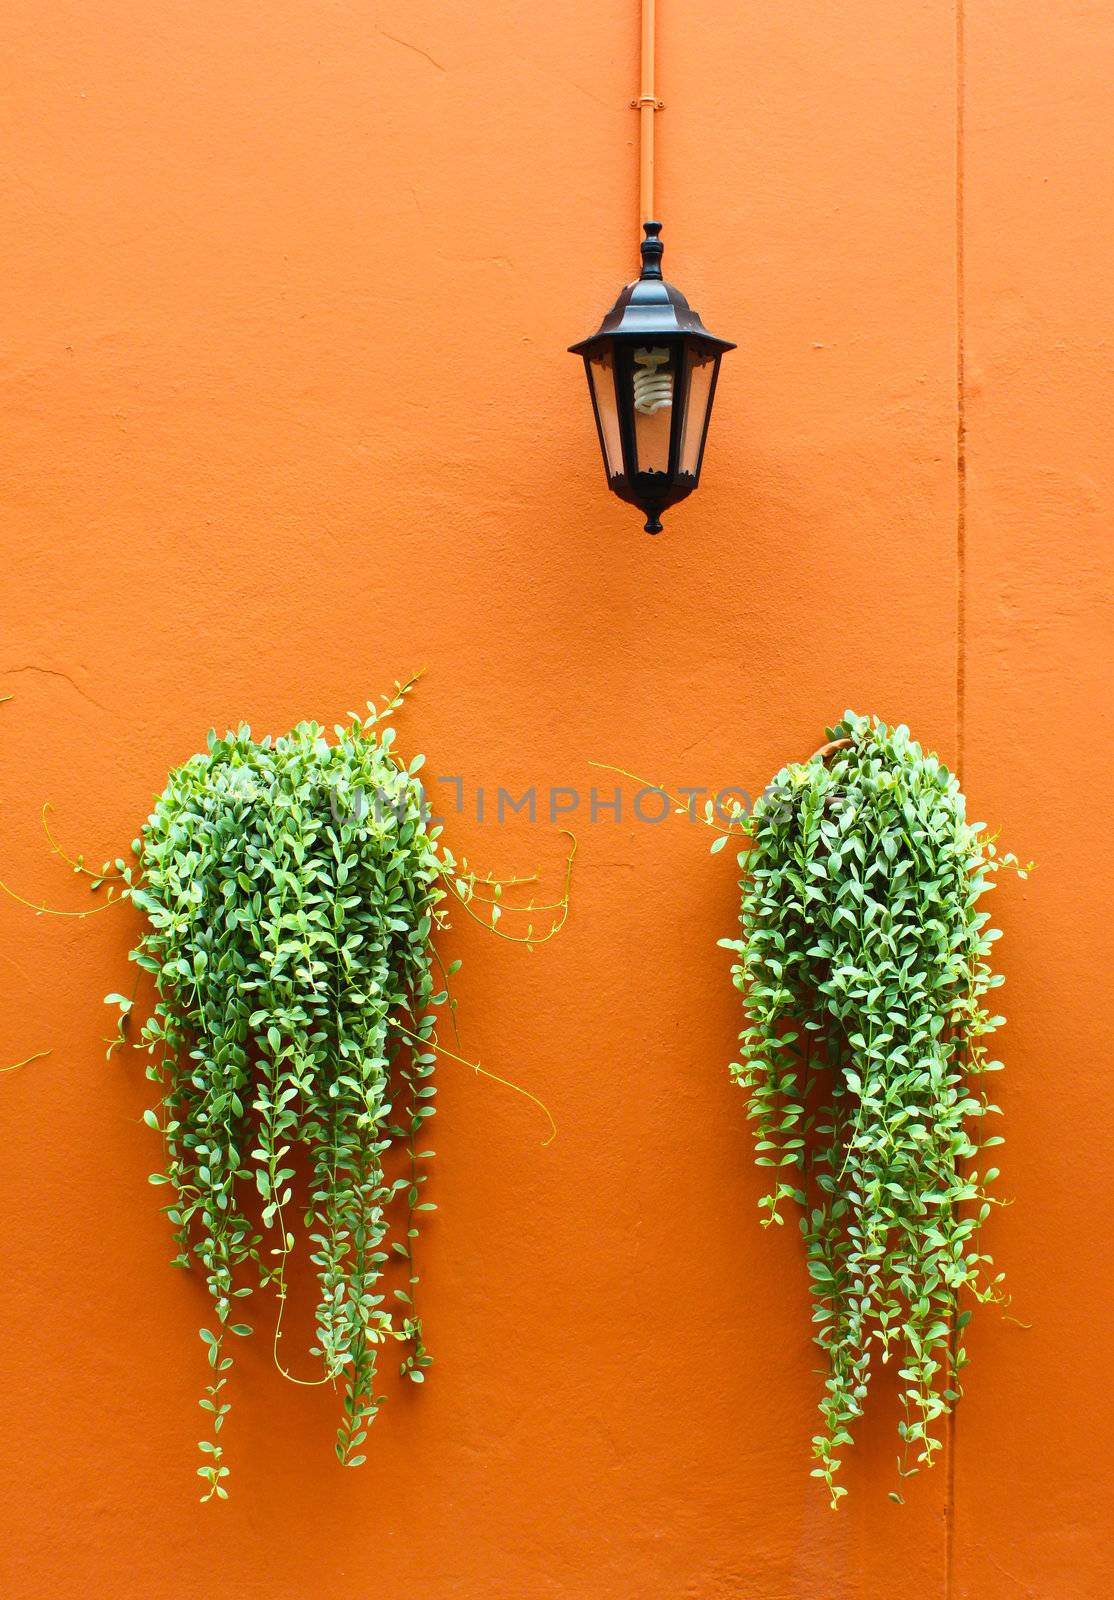 old lamp with green plants on orange wall  by nuchylee